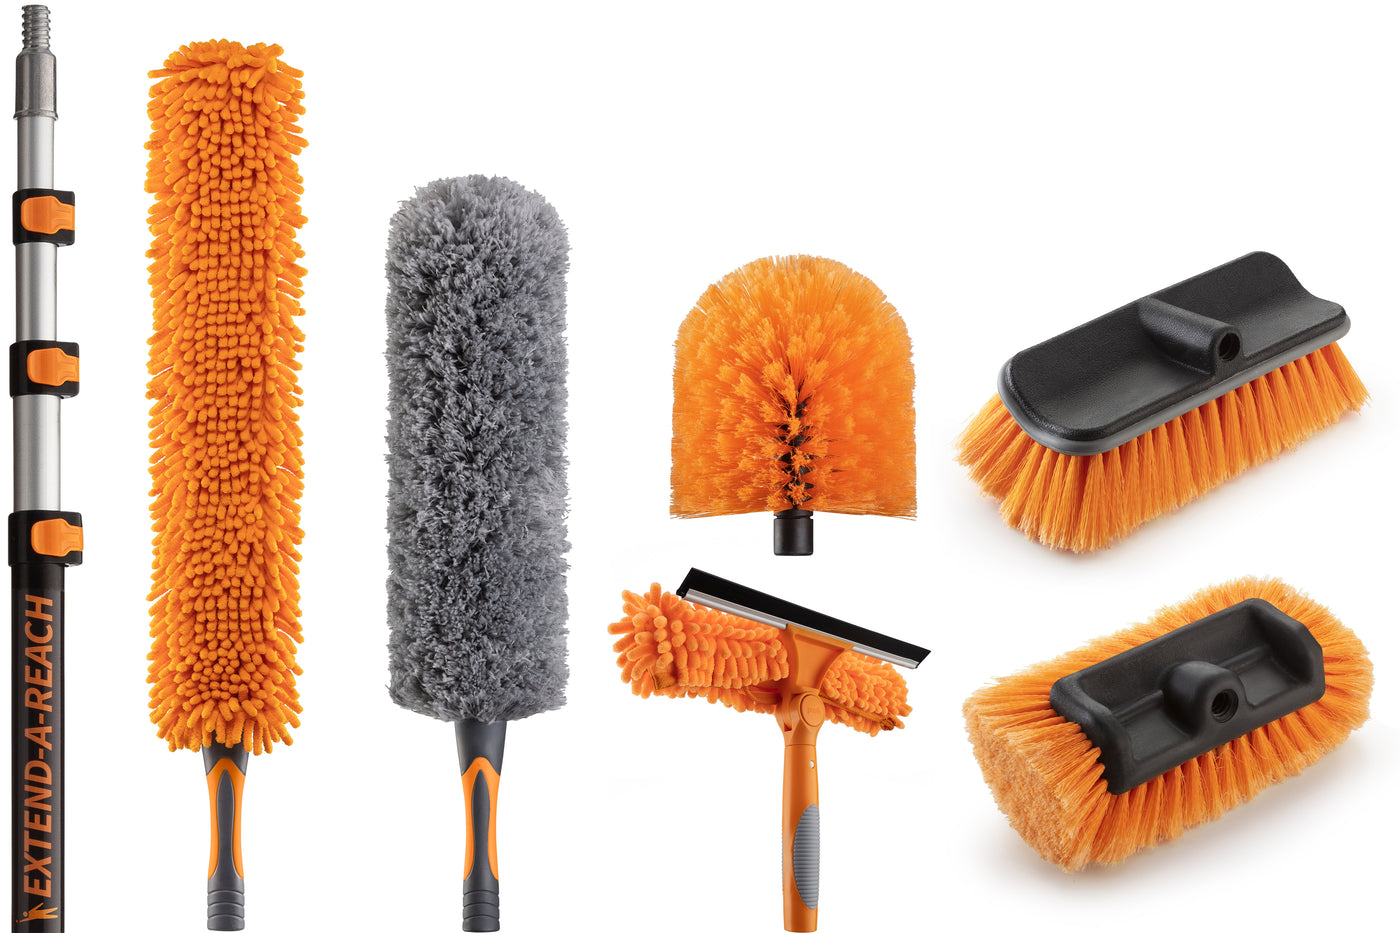 High Reach Telescoping Duster Kit and Vinyl Siding Brushes with